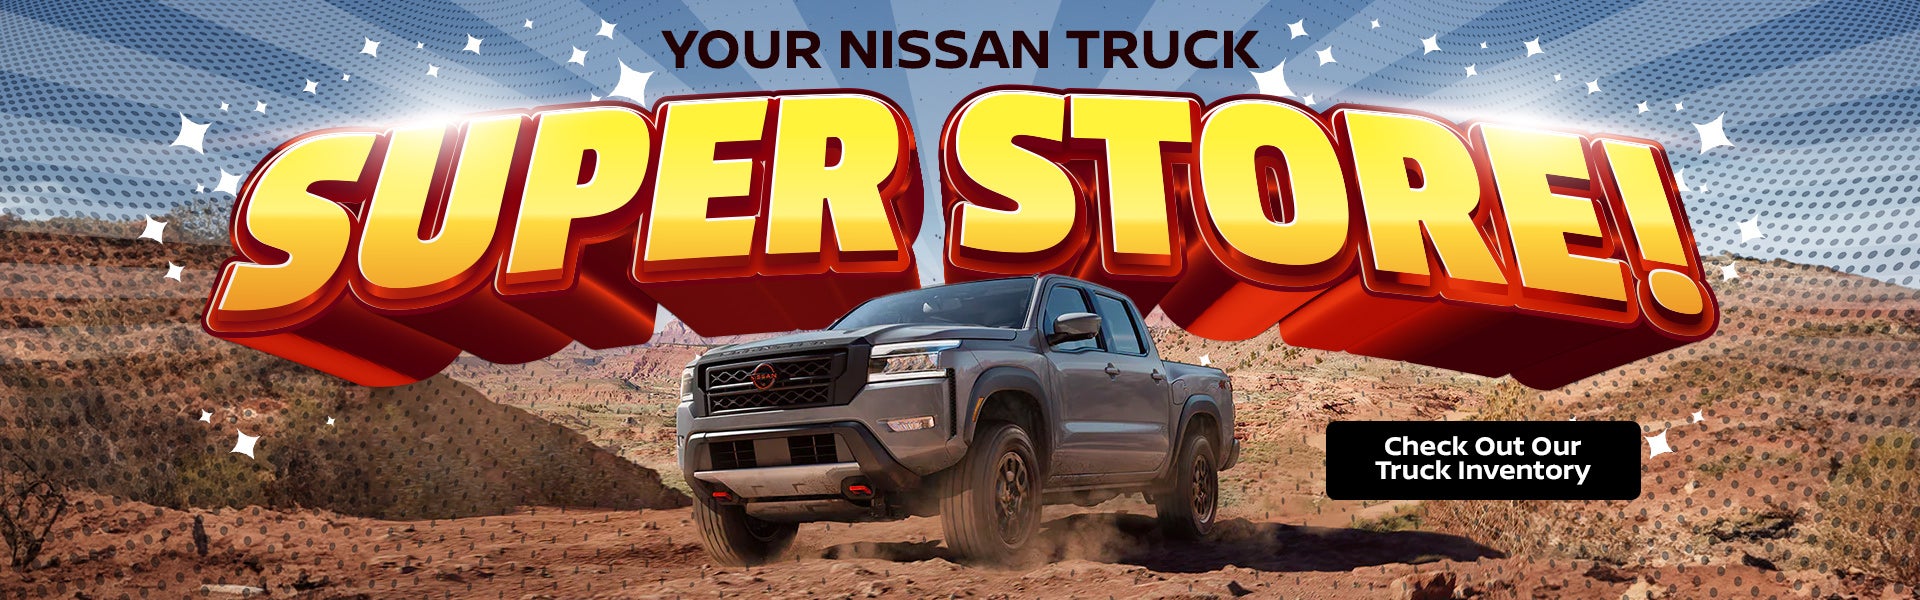 Your Nissan Truck Super Store